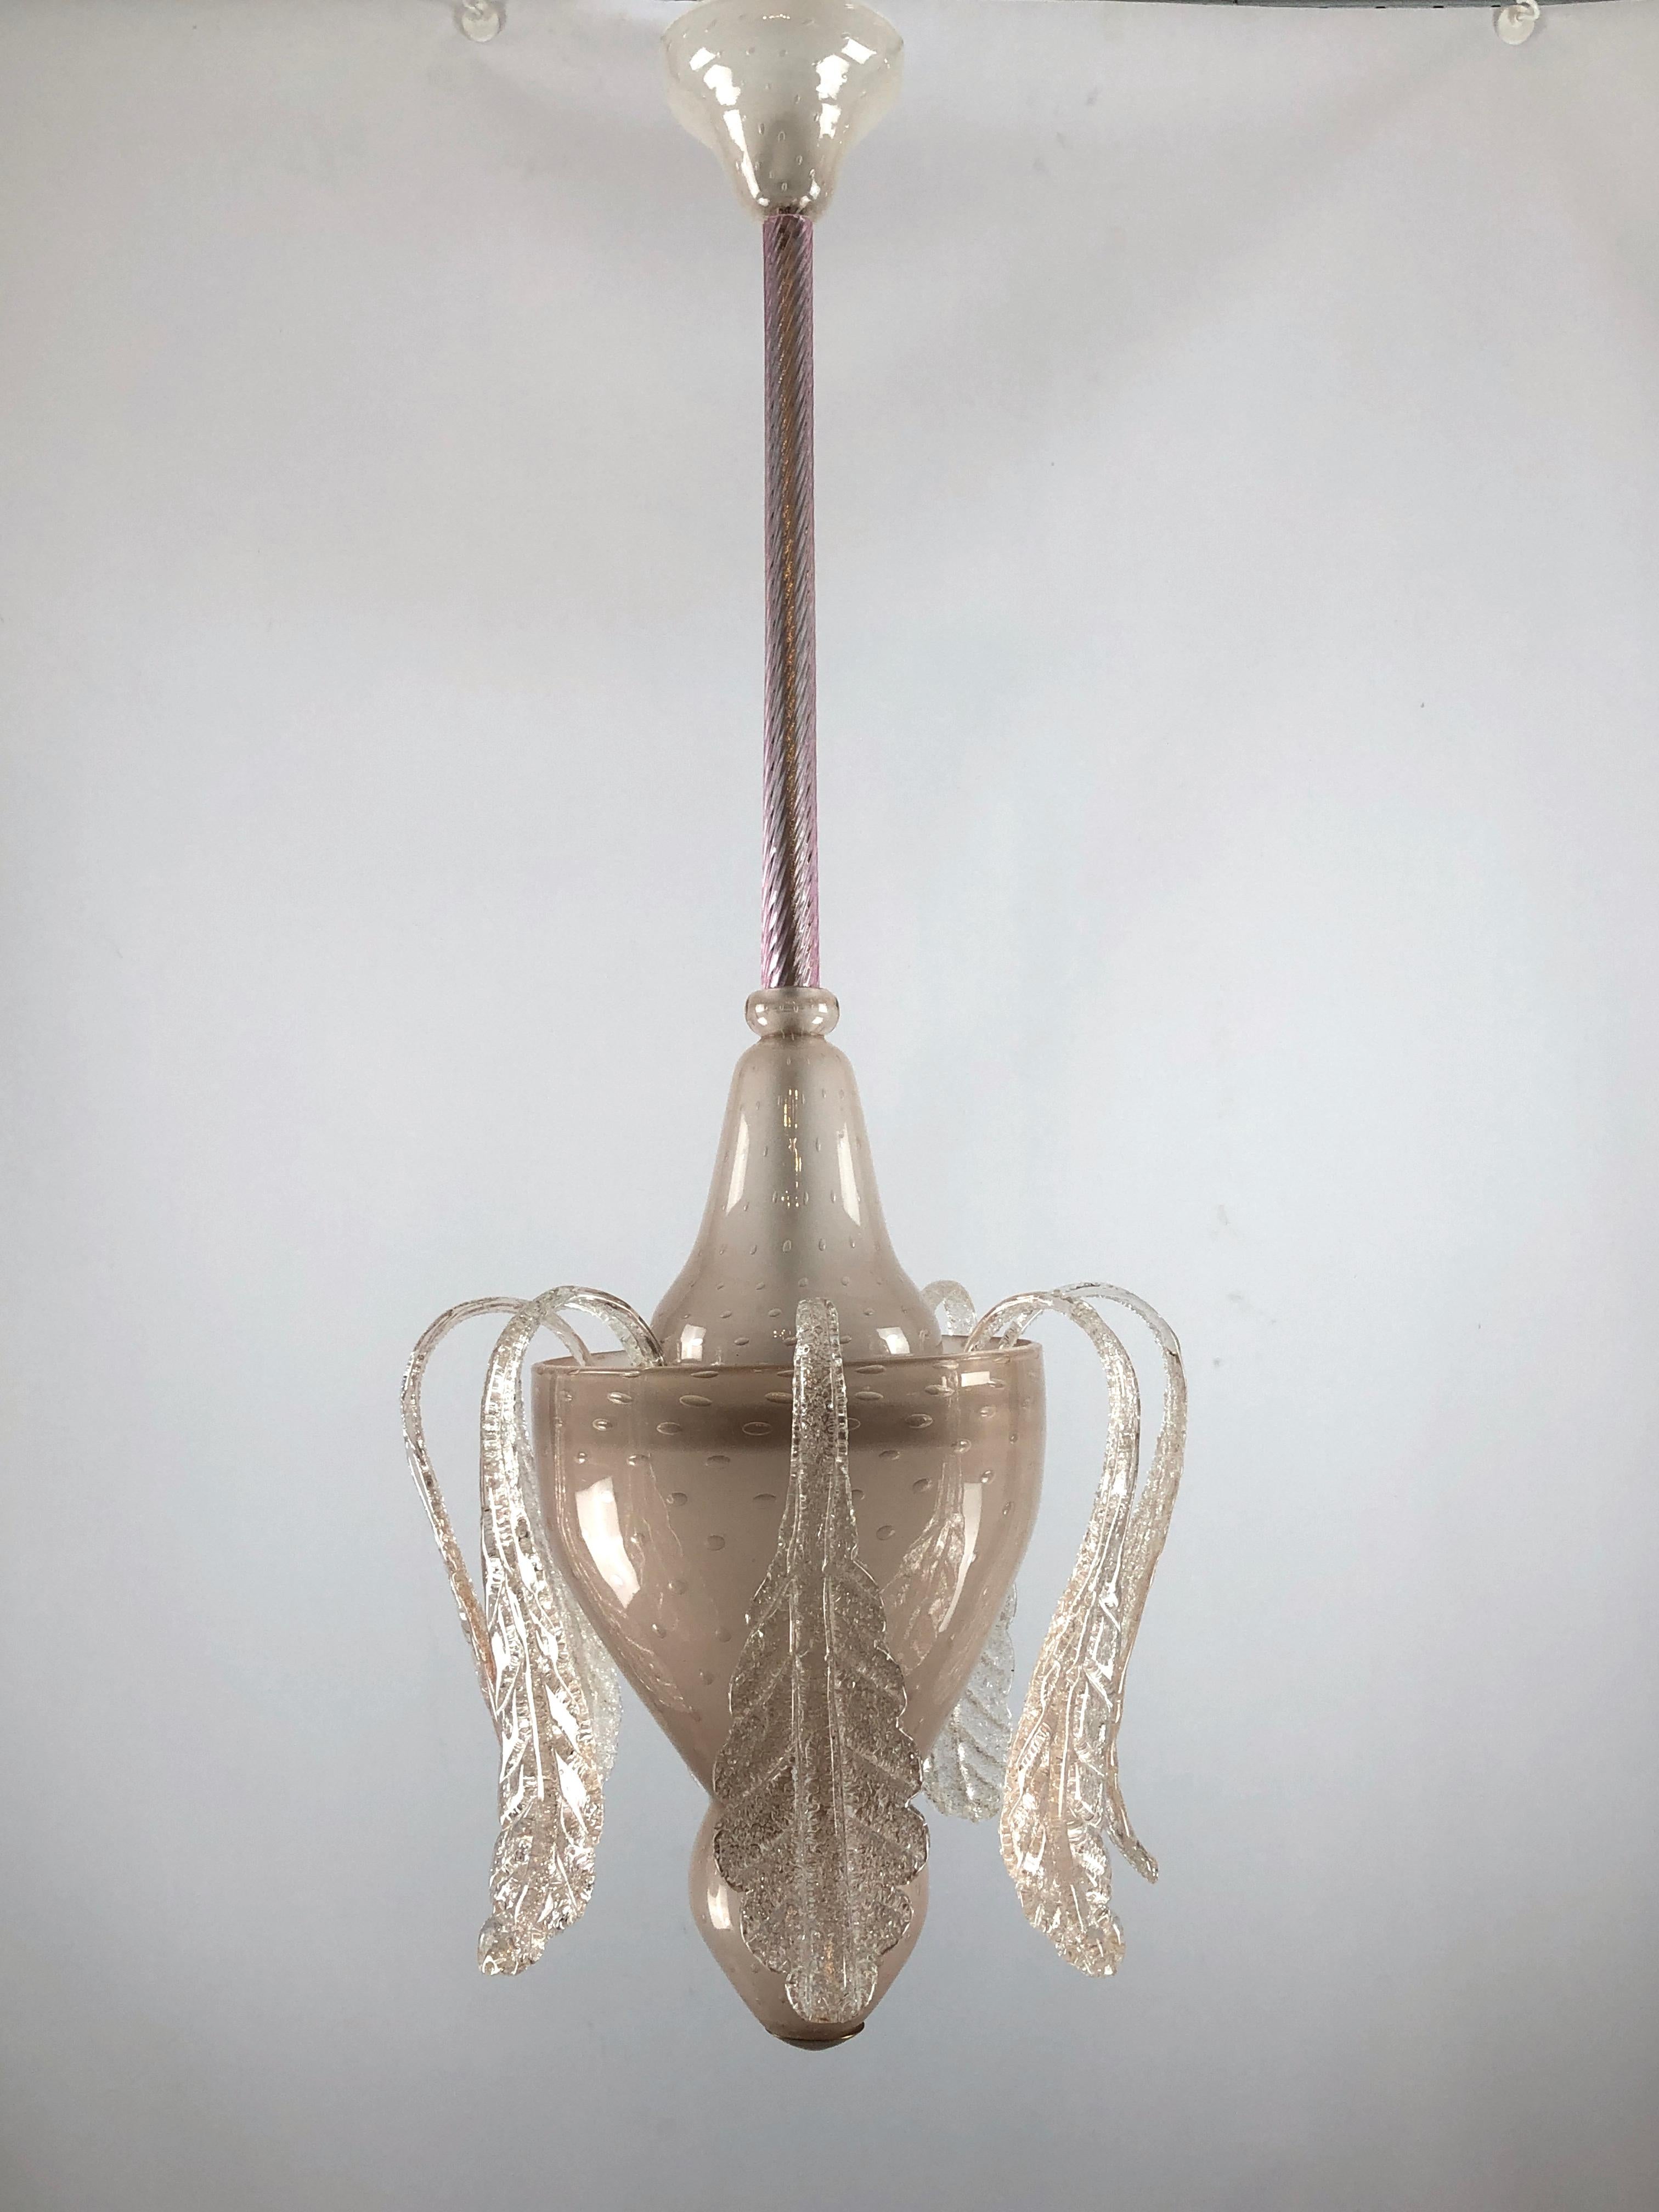 Great condition with no chips or cracks for this chandelier made from rare pink 